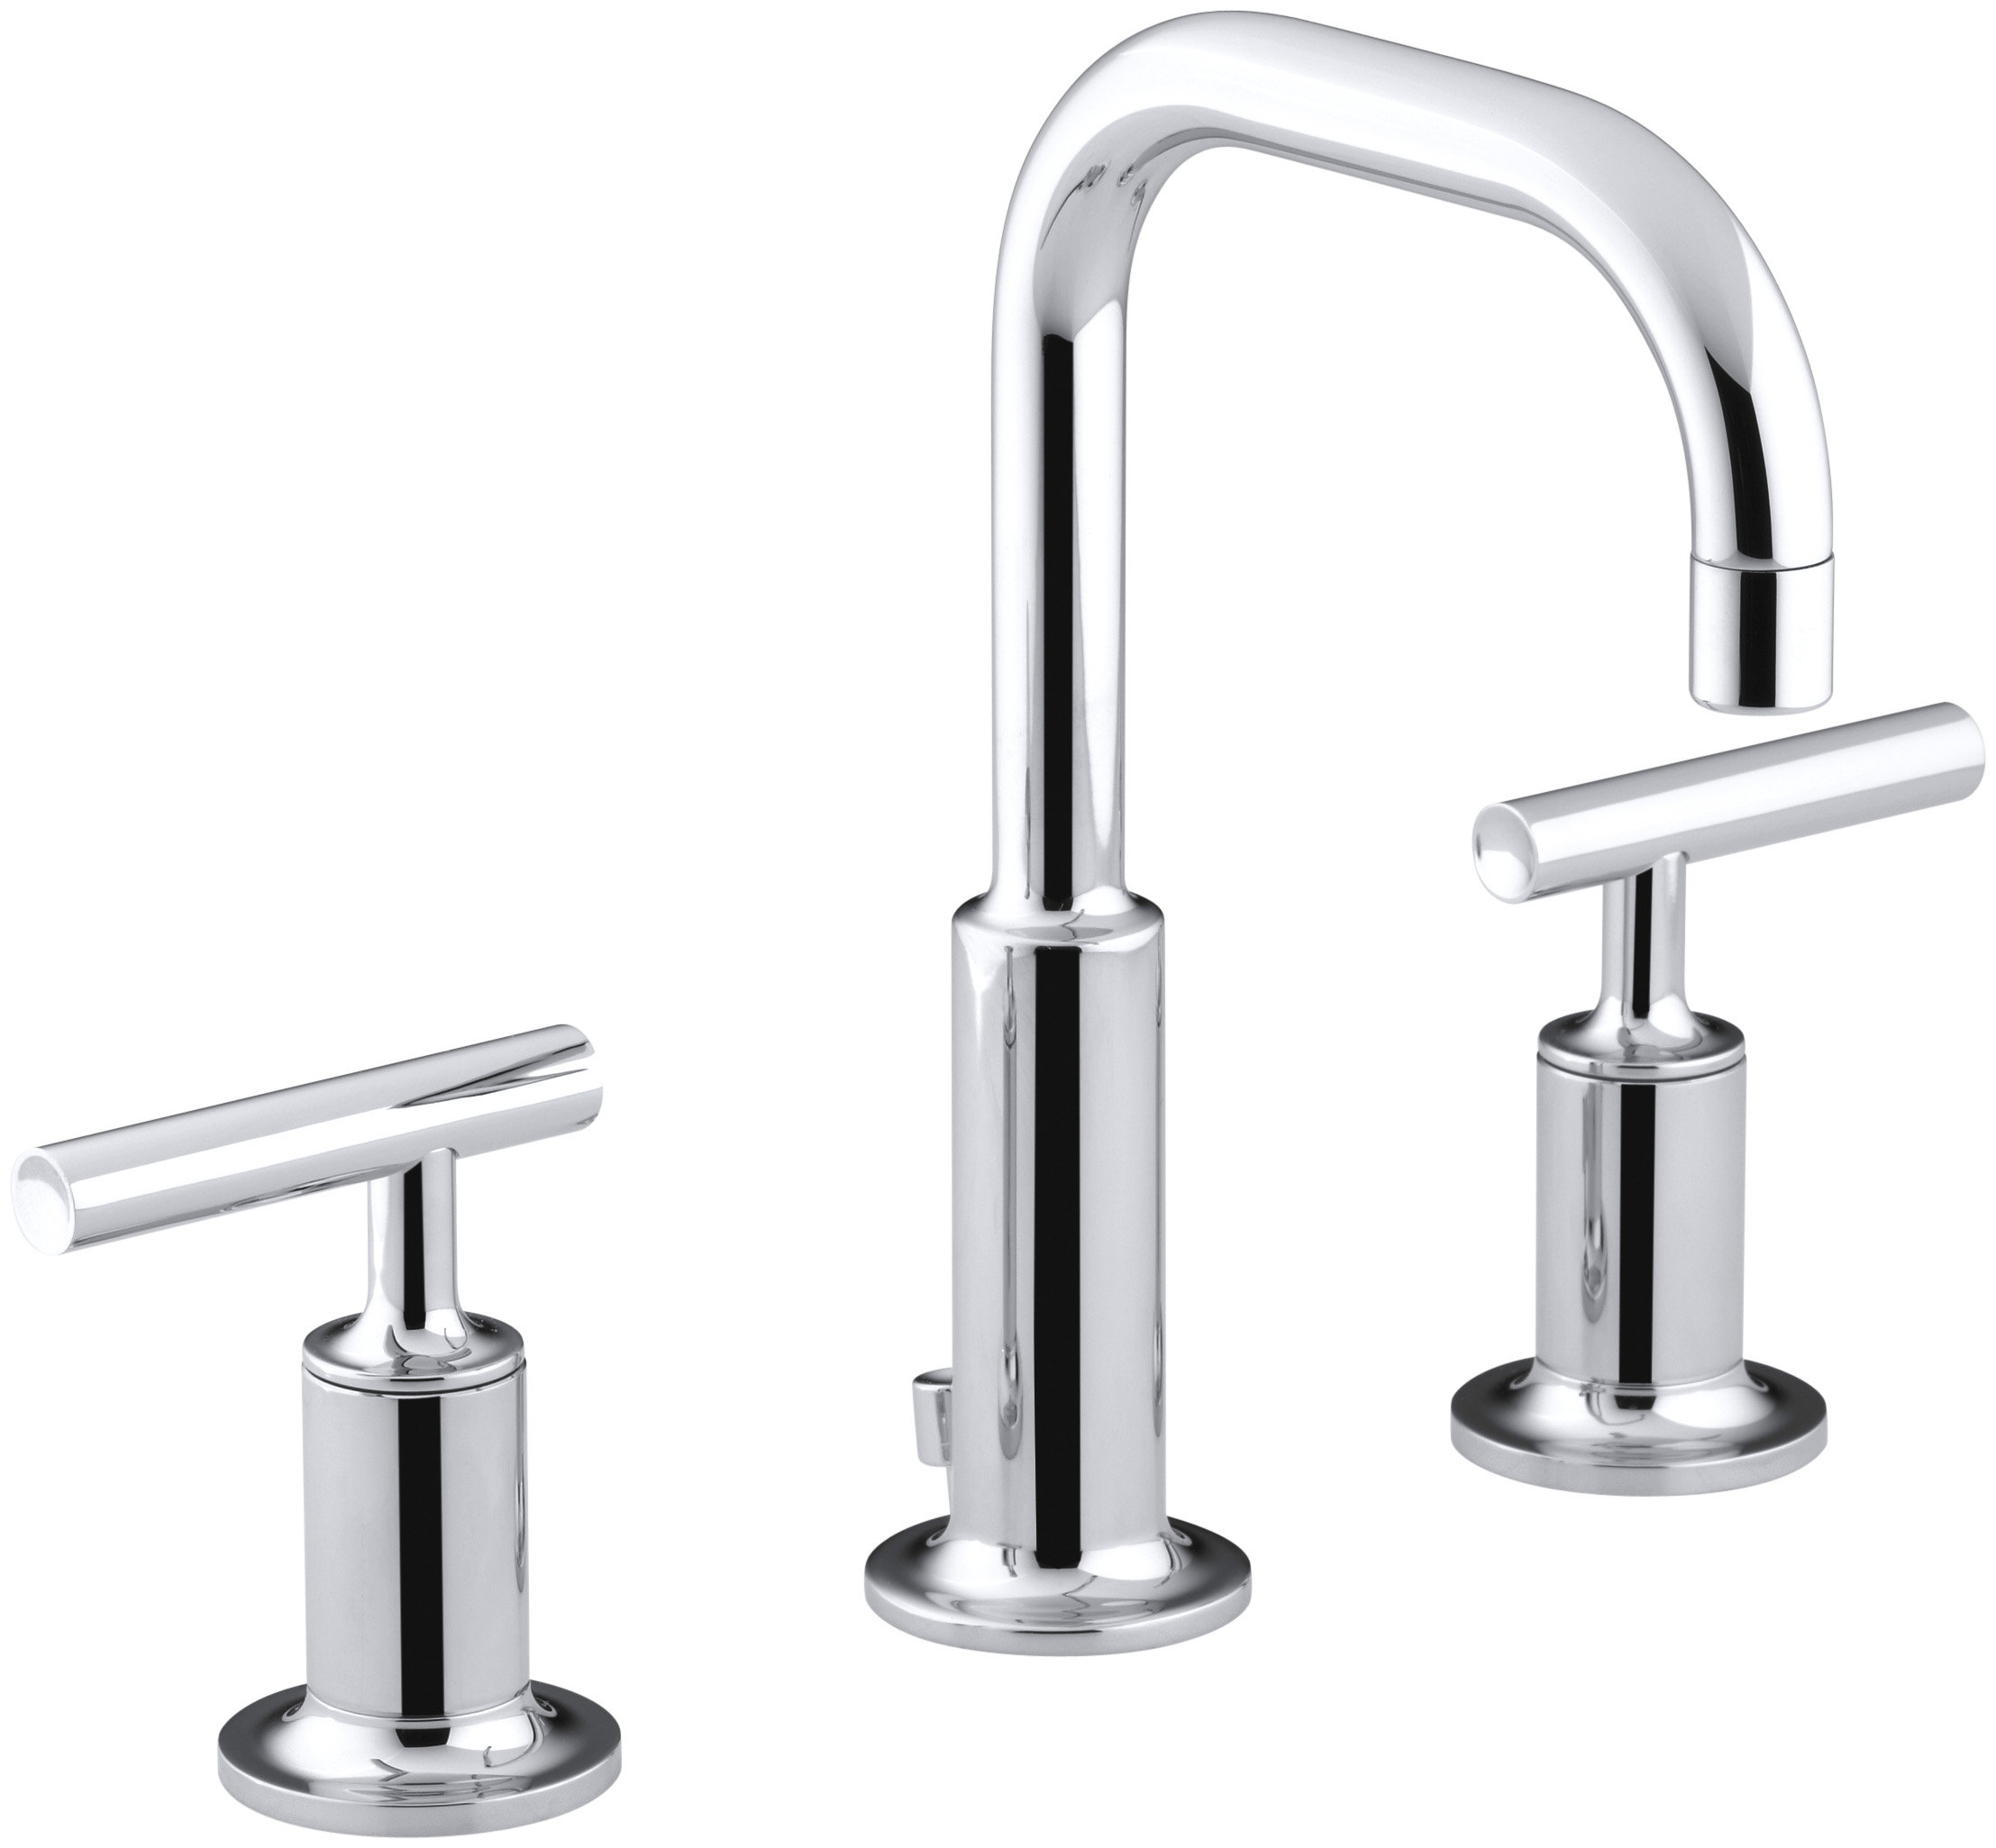 Purist Widespread Bathroom Faucet With Drain Assembly Reviews